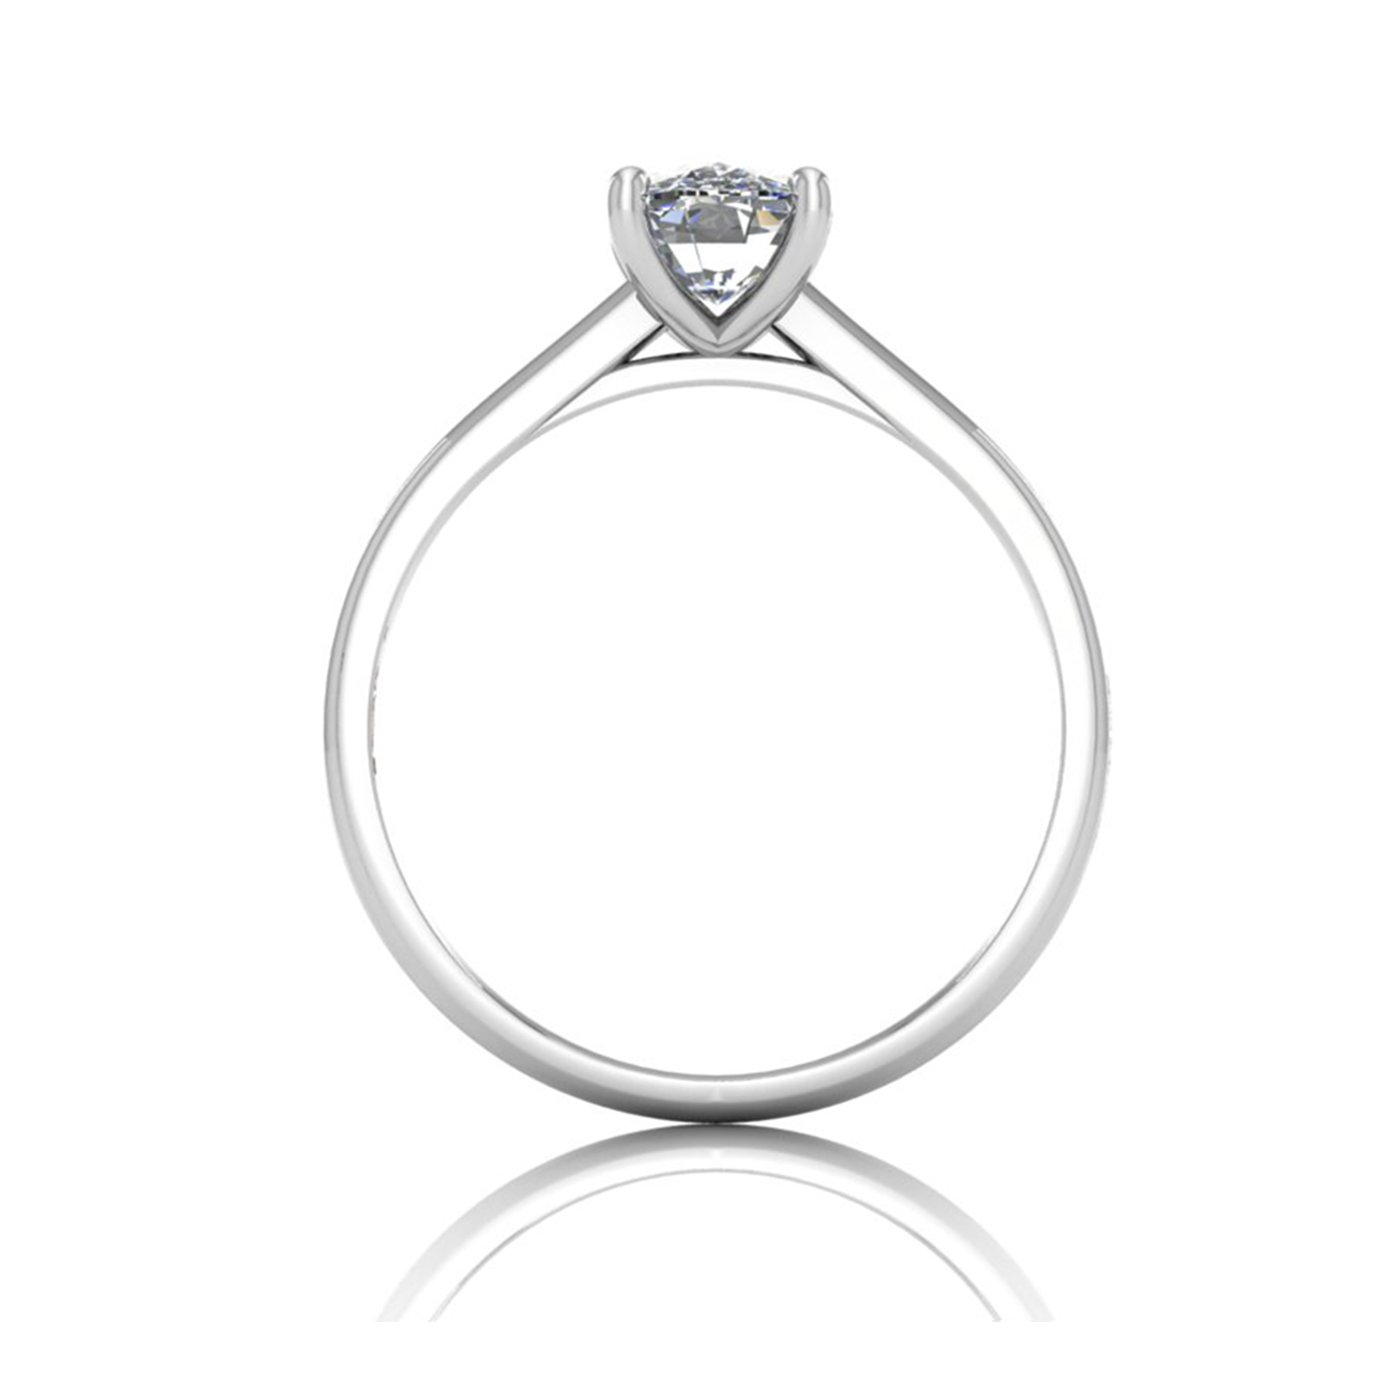 18k white gold  1.50 ct 4 prongs solitaire elongated cushion cut diamond engagement ring with whisper thin band